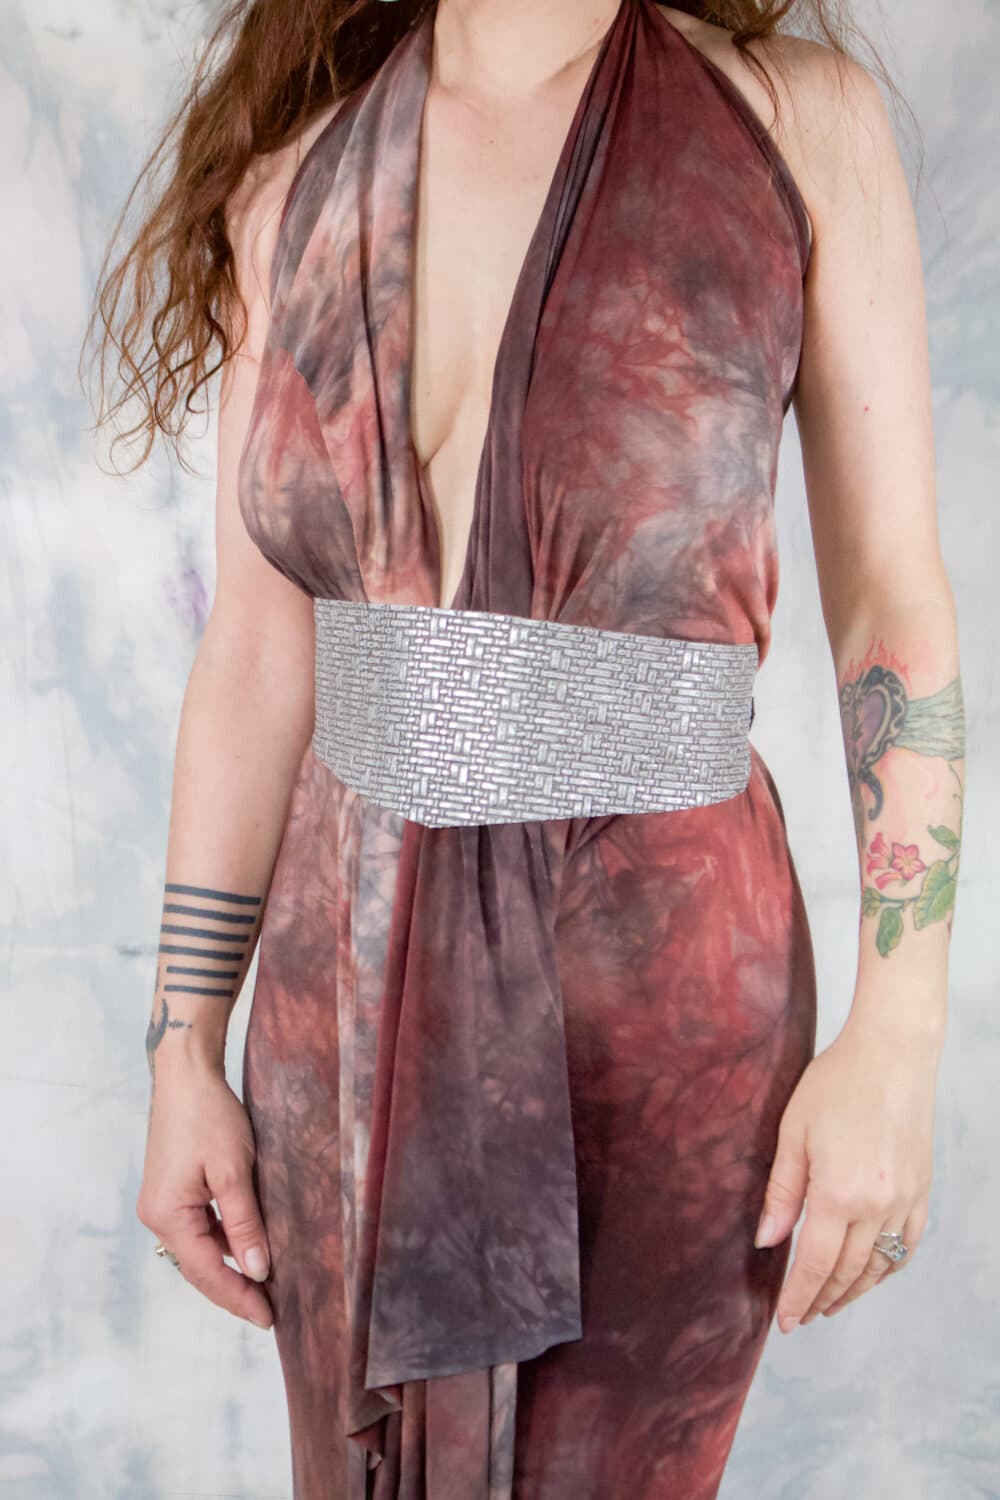 A woman model showcasing a silver leather, wrap-around cincher belt that has a futuristic, embossed pattern on the front; wearing it in the middle of her torso, cinching in the dress she is wearing.